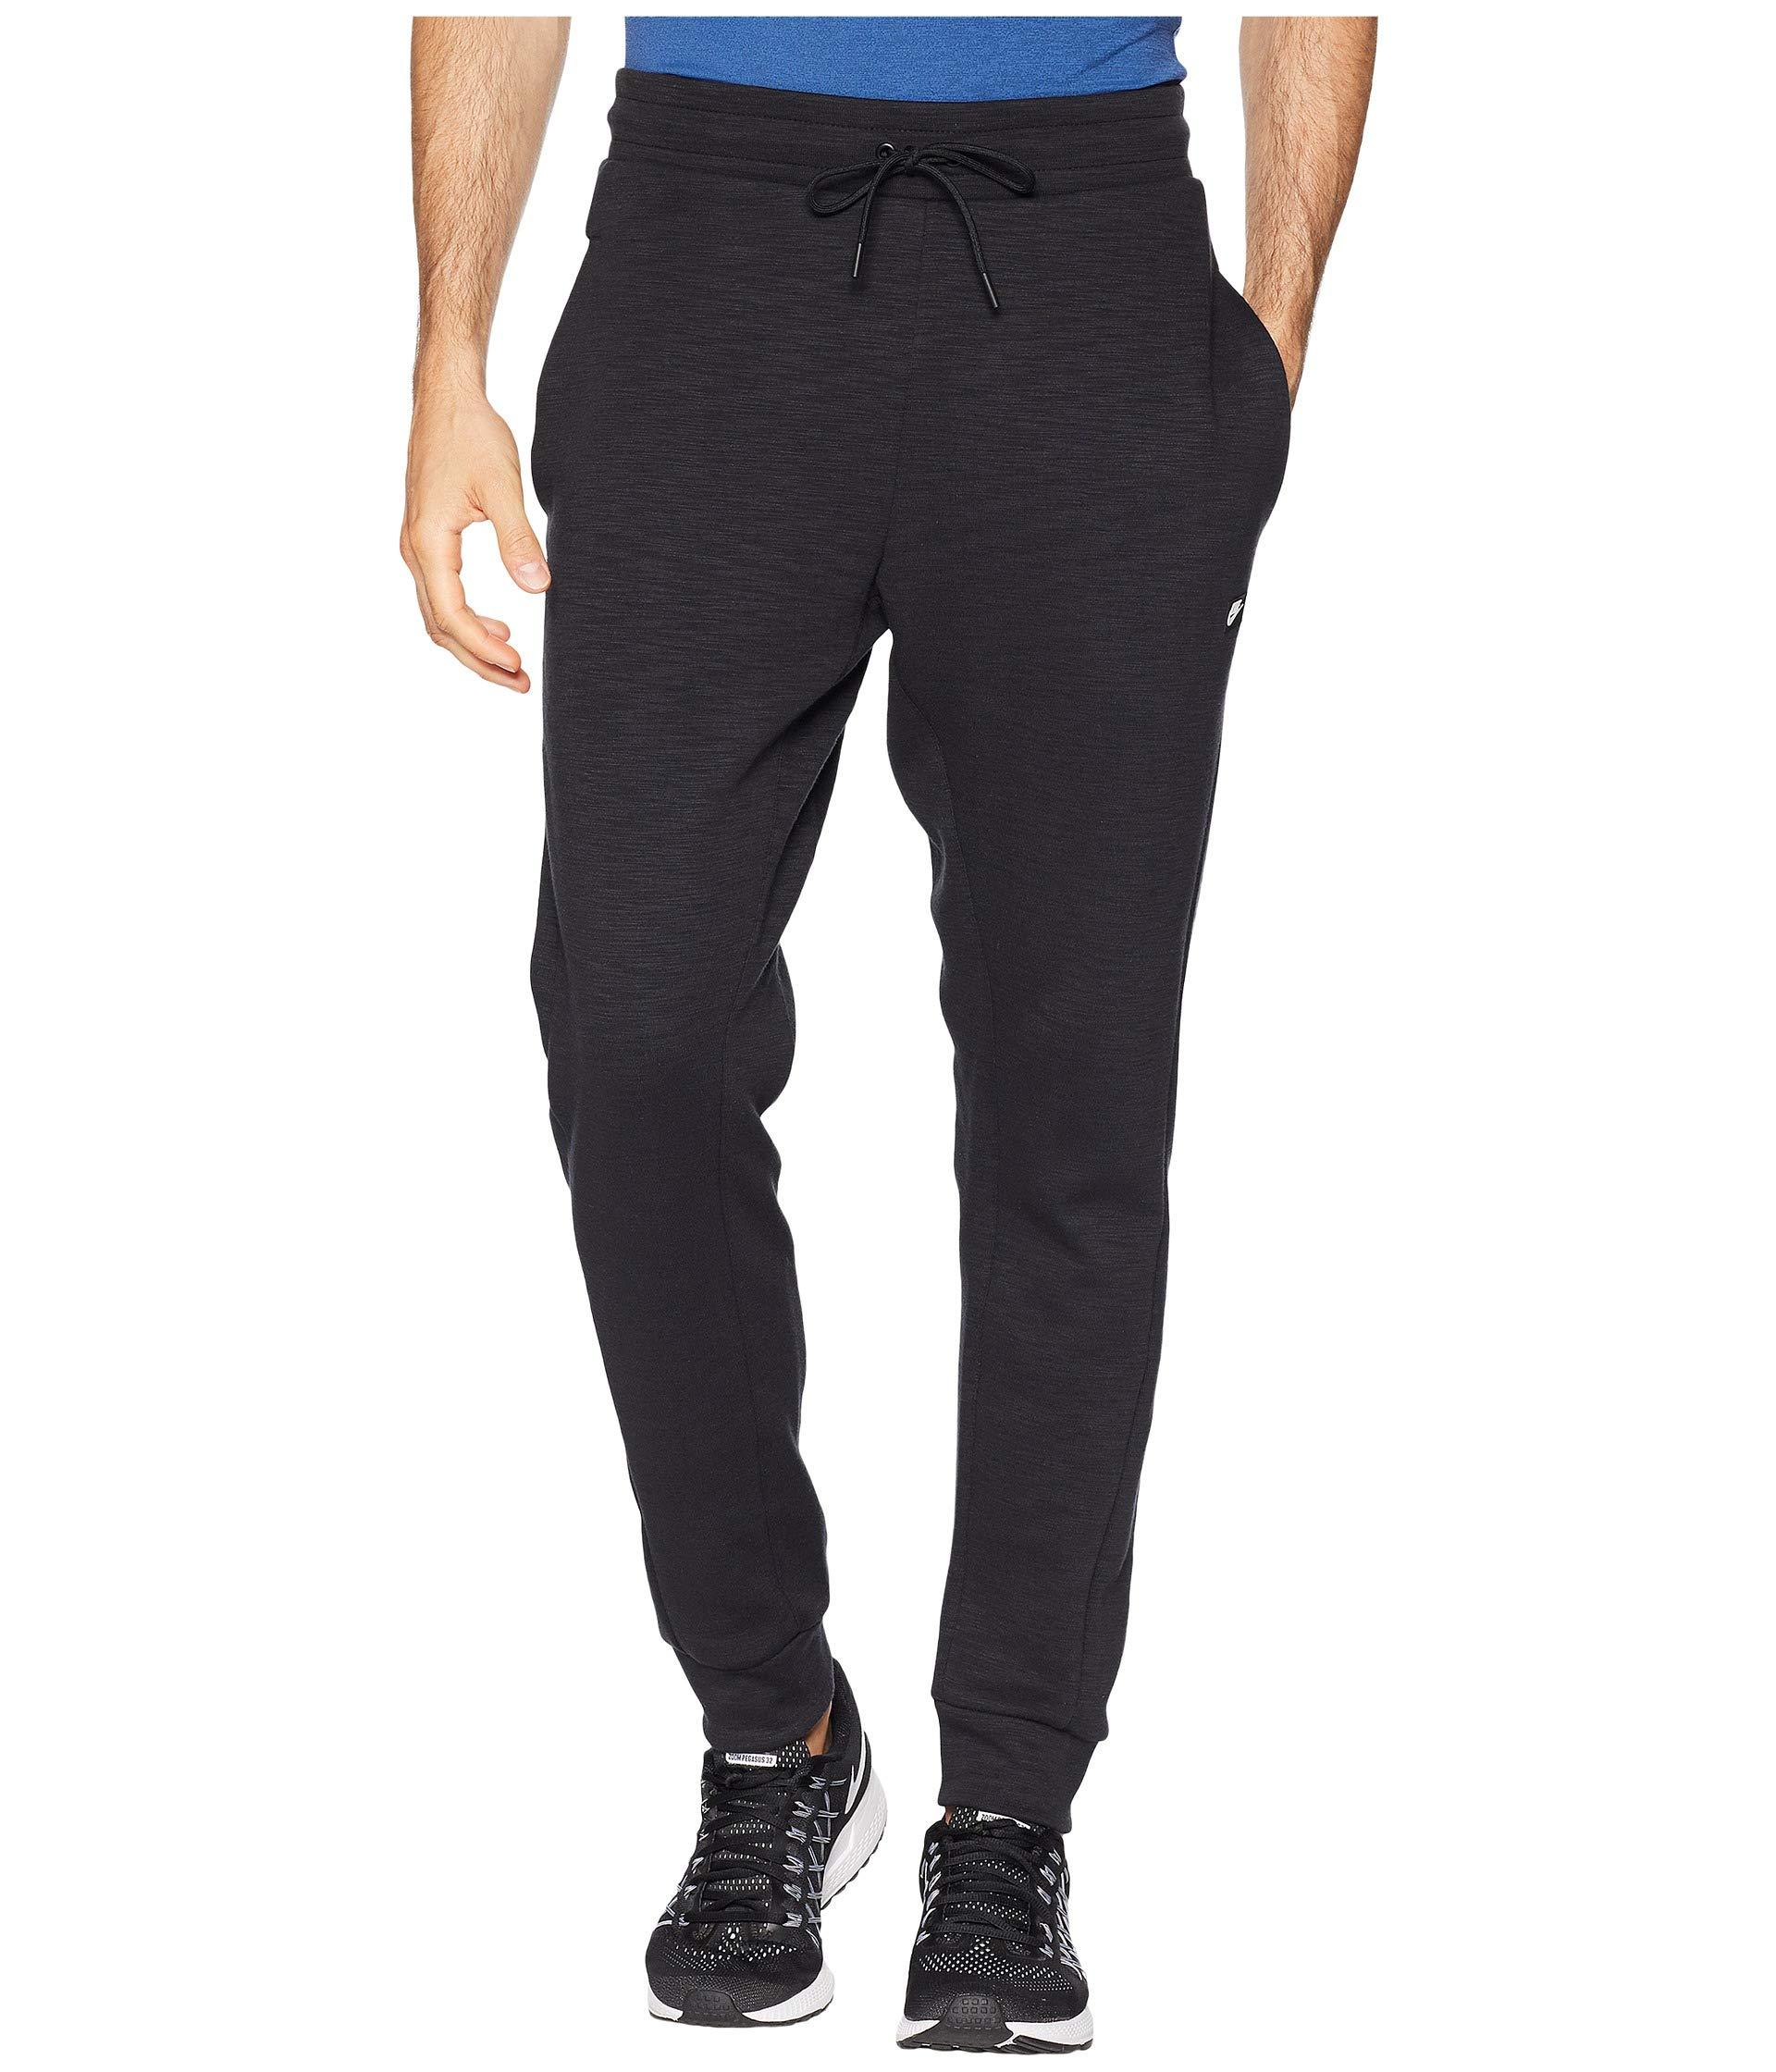 Nike Cotton Nsw Optic Jogger in Black for Men - Lyst